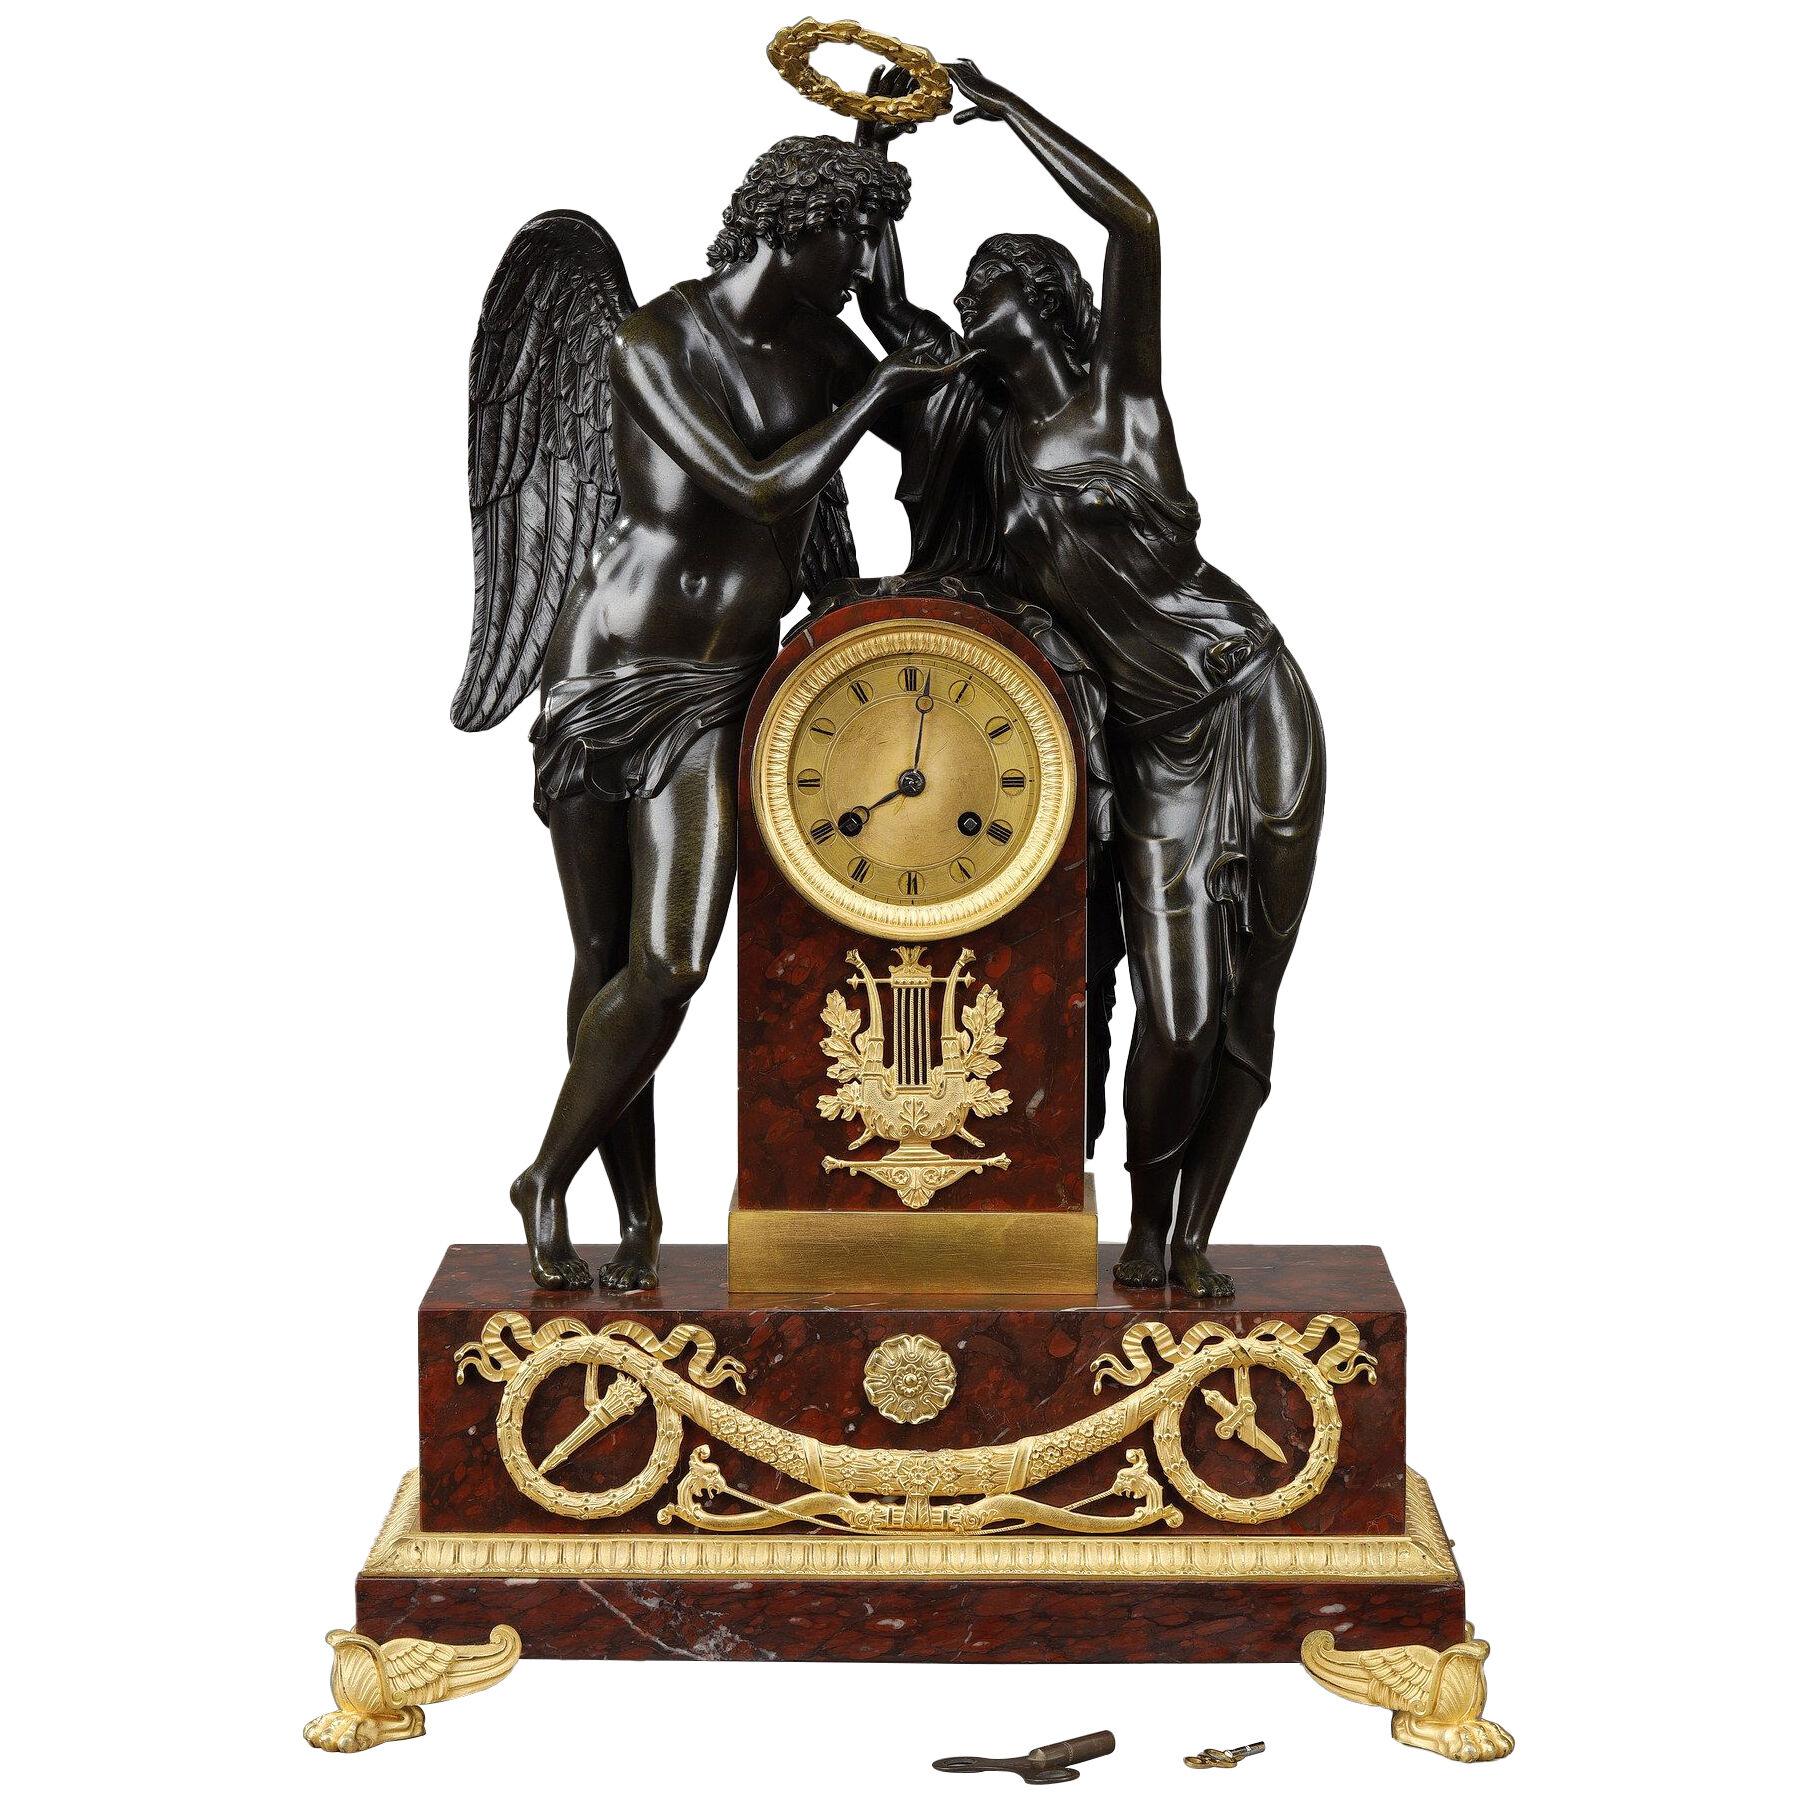 Cupid and Psyche clock after Claude Michallon